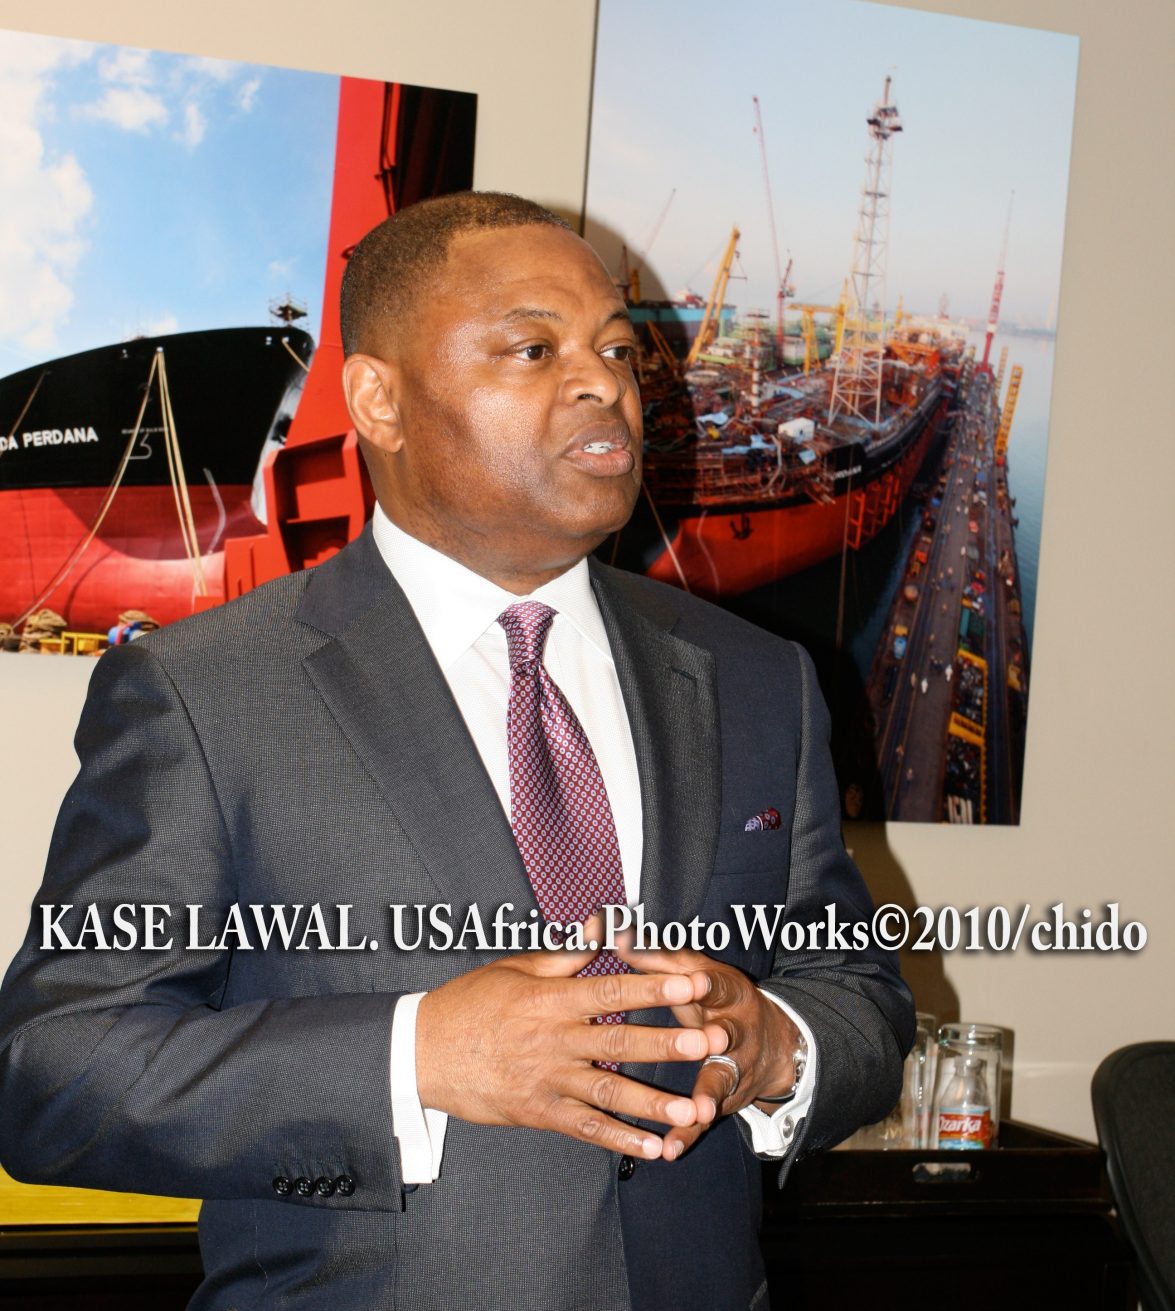 Obama's appointing Kase Lawal to trade committee continues upward march by oil and gas heavyweight….